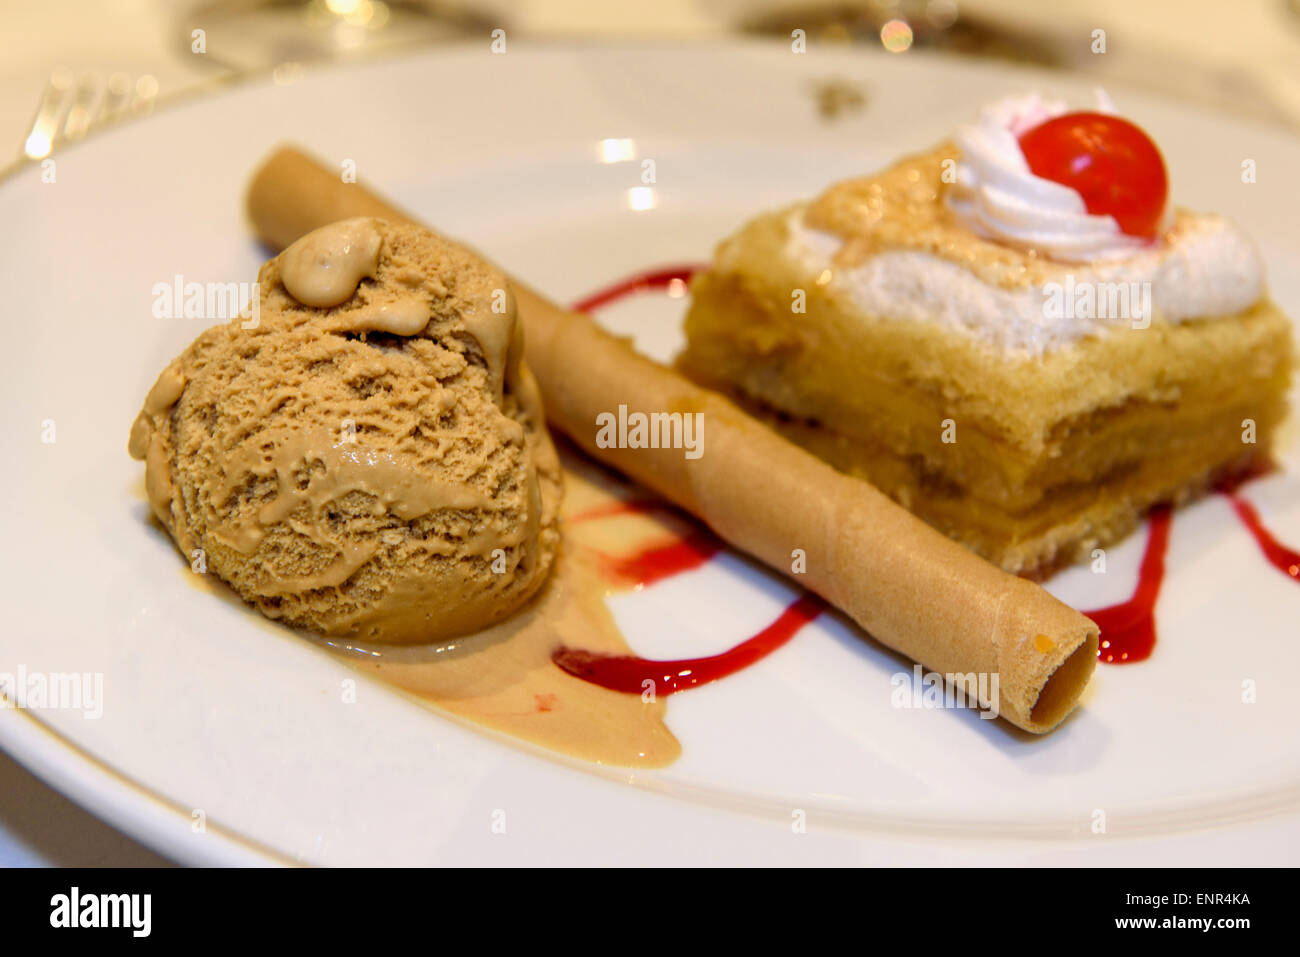 Dessert with icecream, cookie and sweet cake, province Murcia, Spain Stock Photo